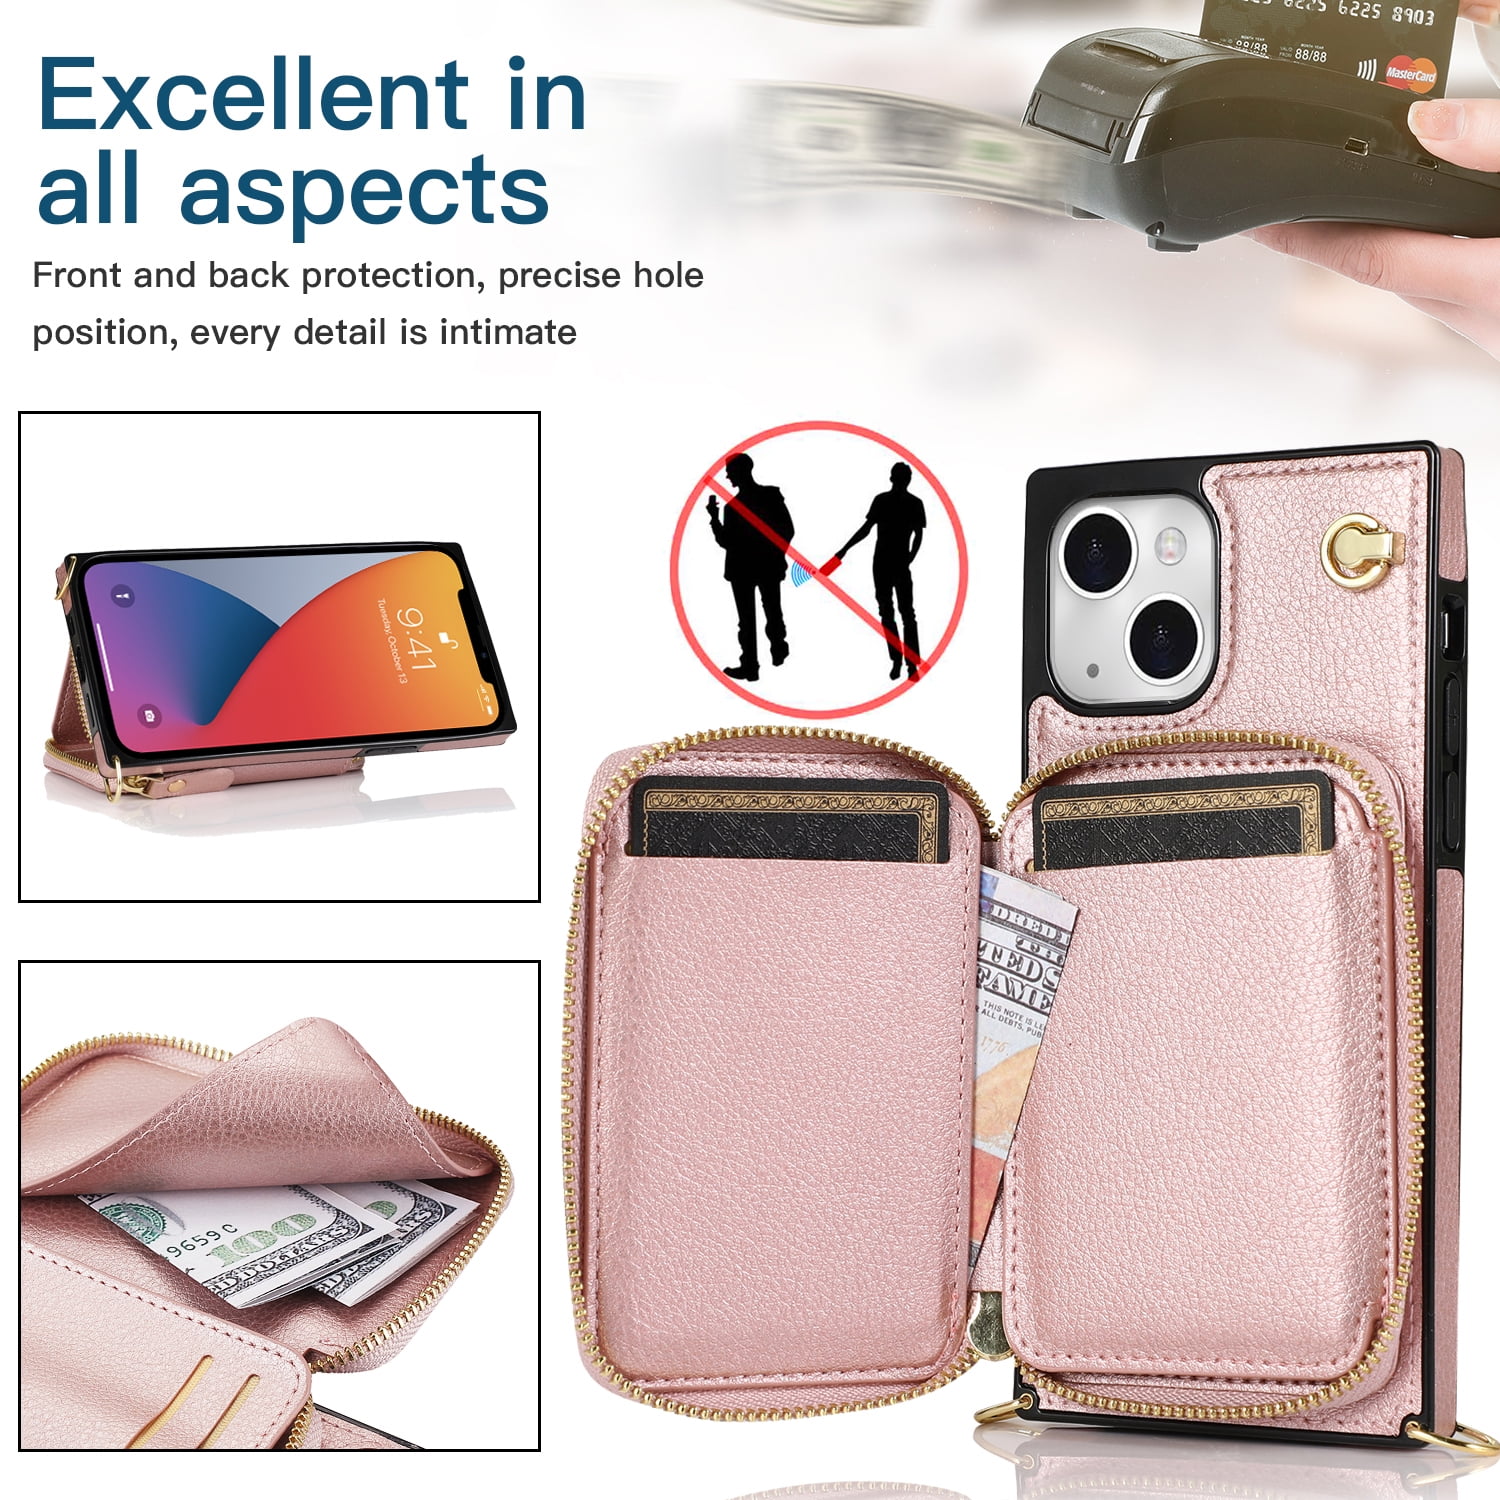  LUVI for Crossbody iPhone 13 Pro Max Wallet Case with Neck  Strap Lanyard Credit Card Holder Purse Handbag Case for Women Girls  Silicone Rubber Soft Protection Cover for iPhone 13 Pro